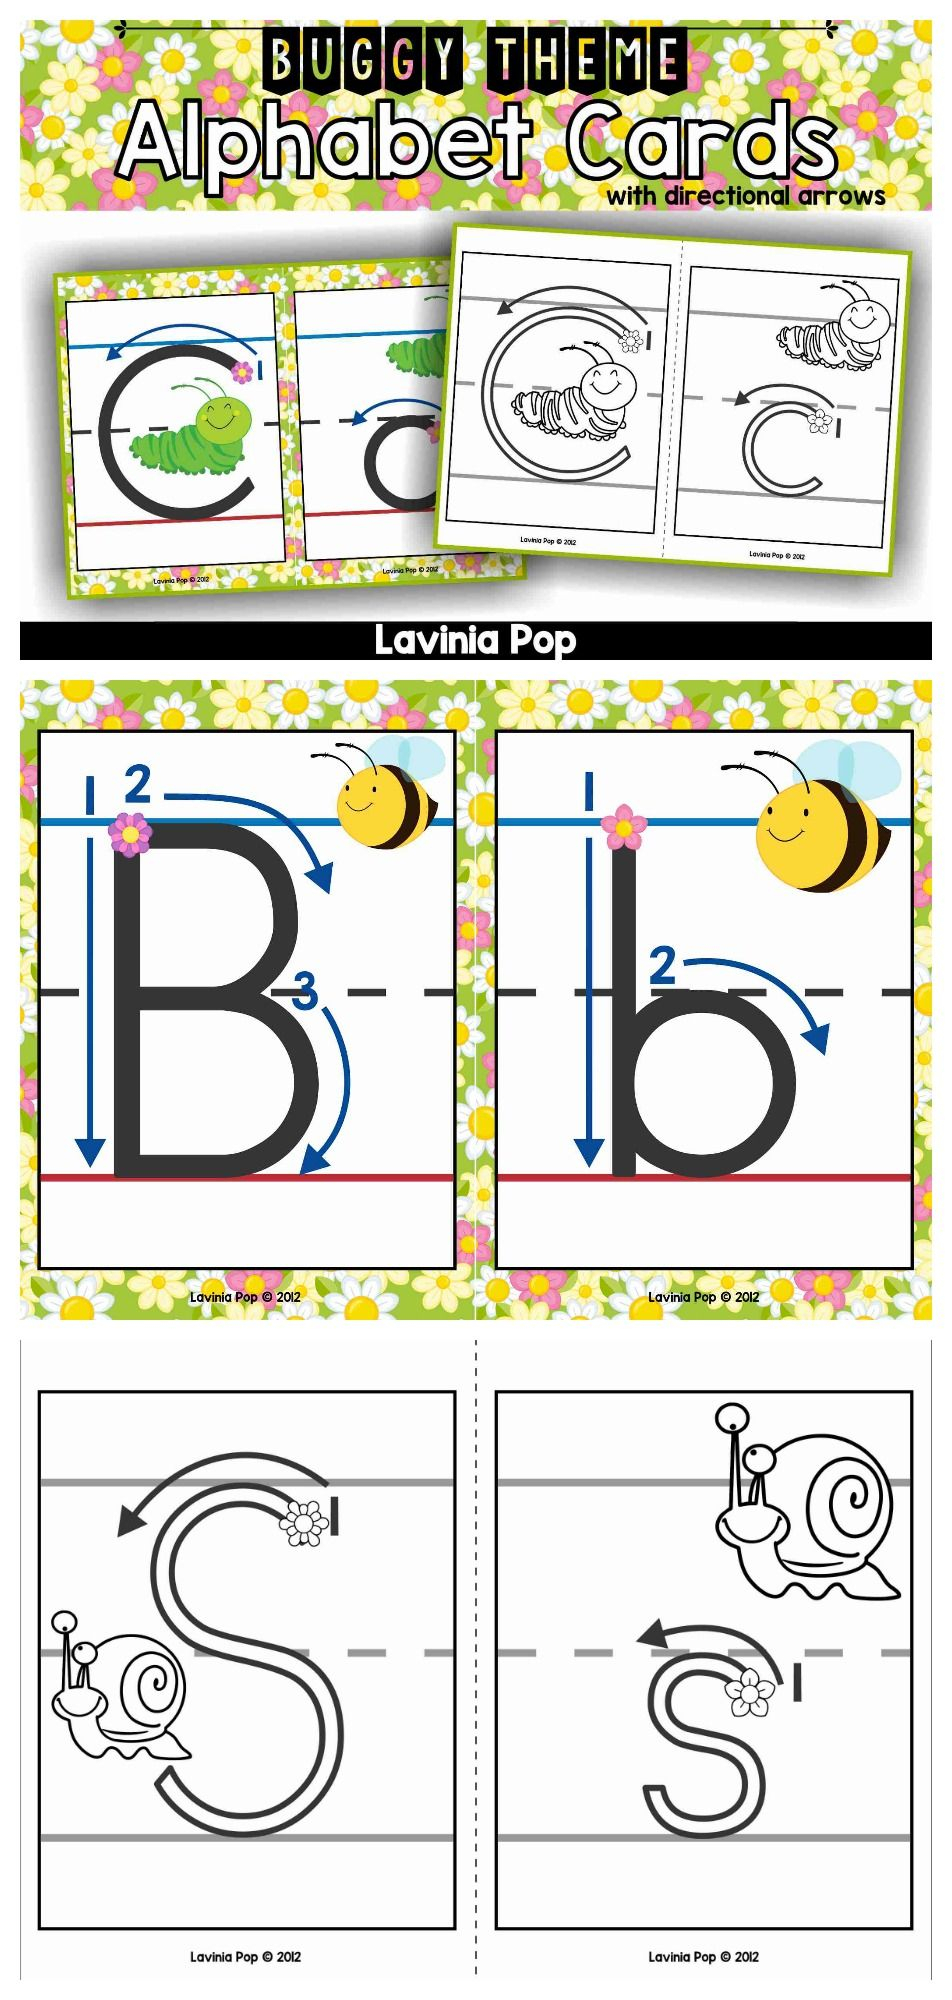 Alphabet Handwriting Cards With Directional Arrows - Buggy with regard to Tracing Letters With Directional Arrows Font